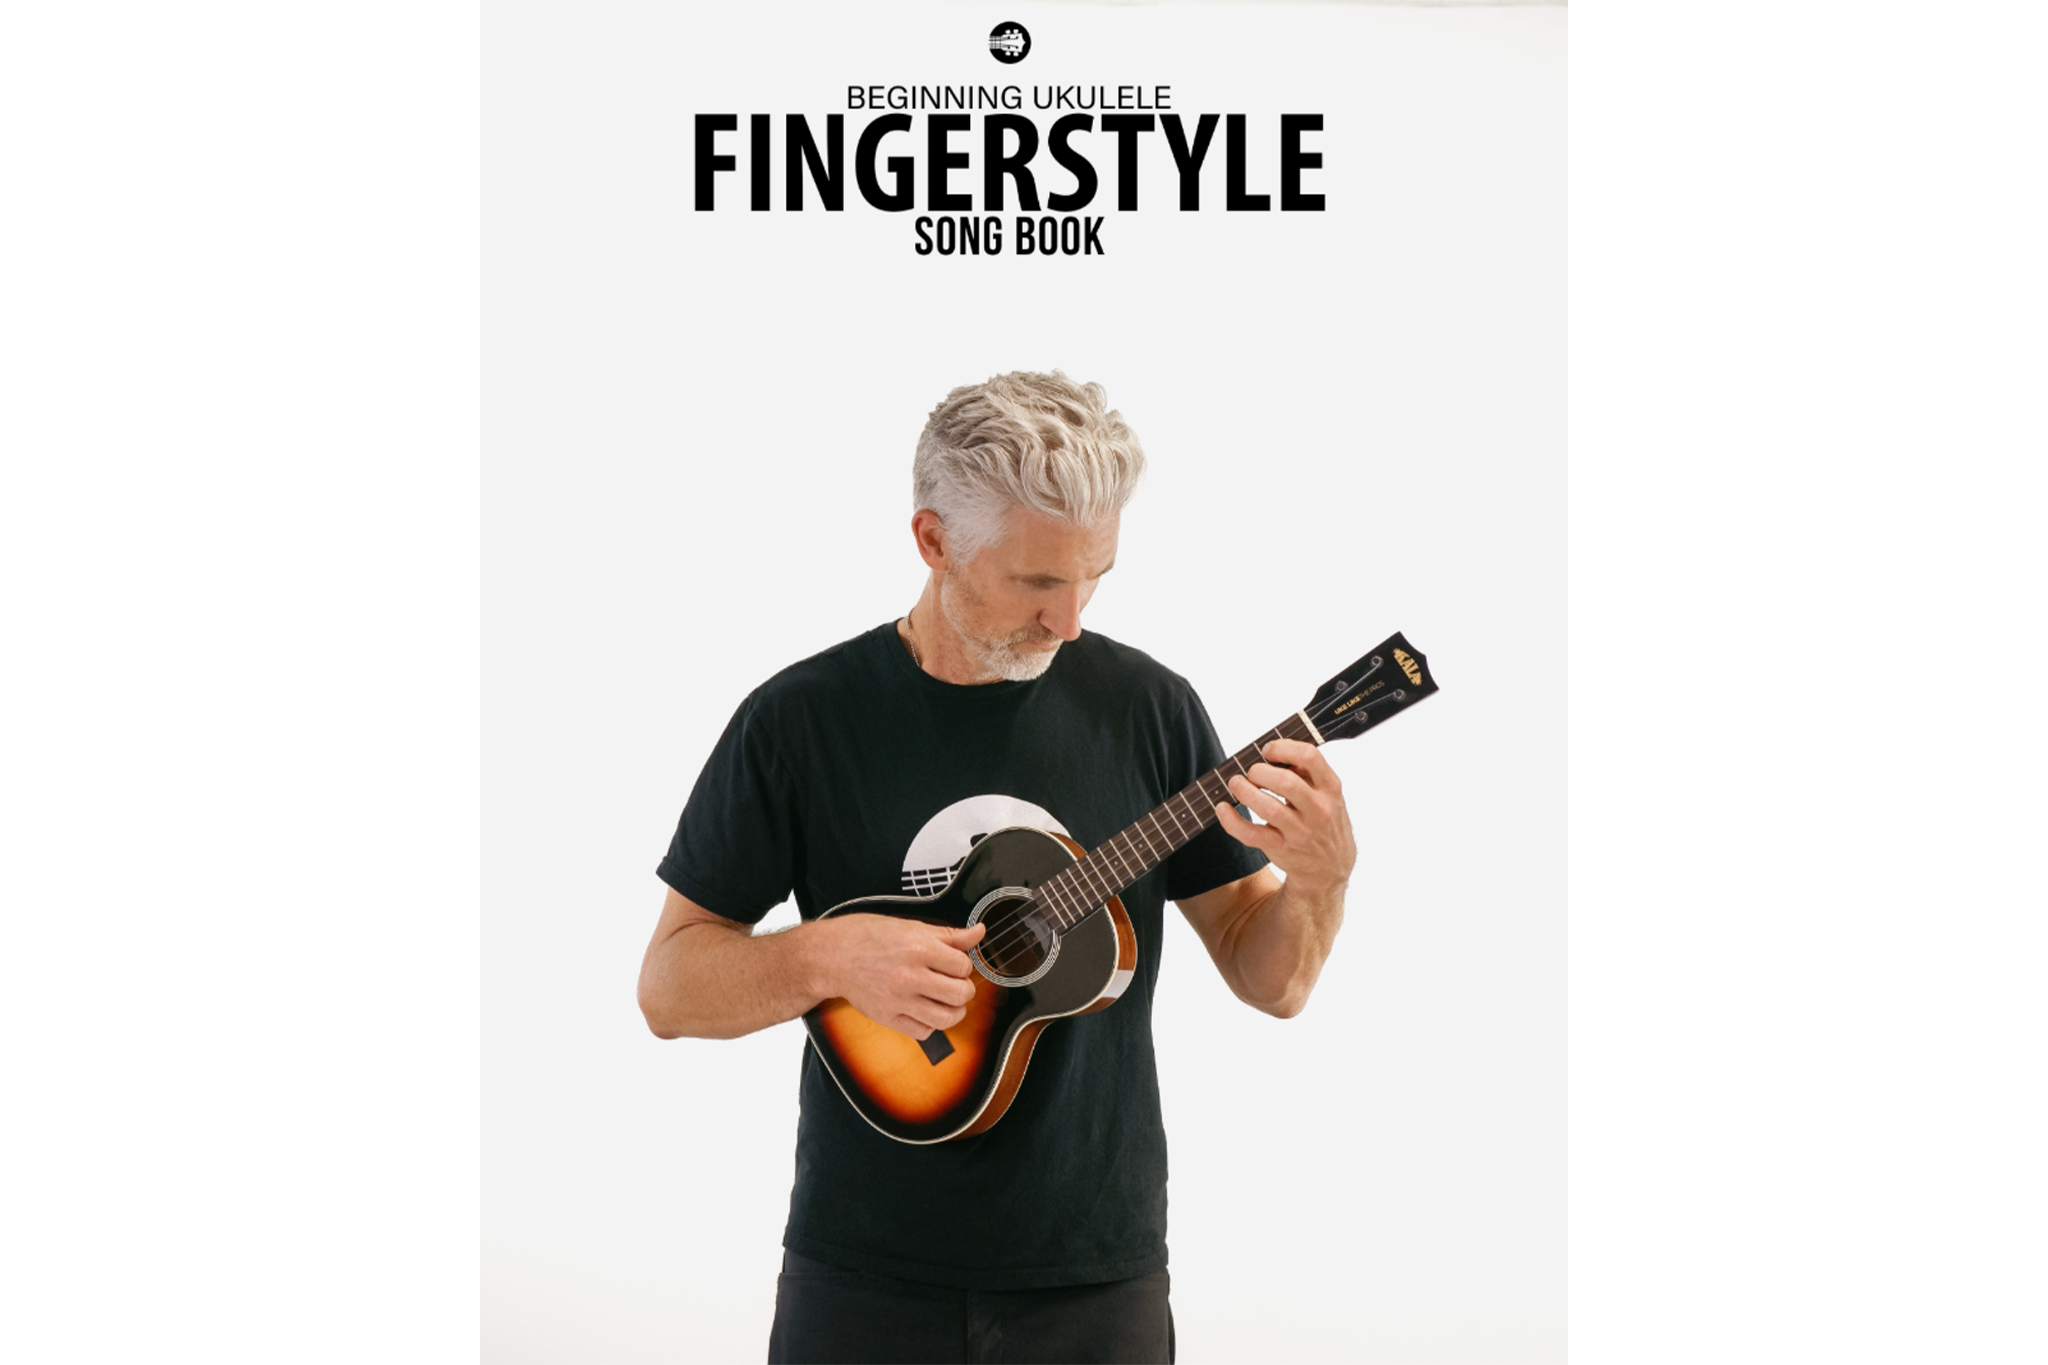 Beginning Ukulele Fingerstyle Songbook PERFECT FOR BEGINNERS